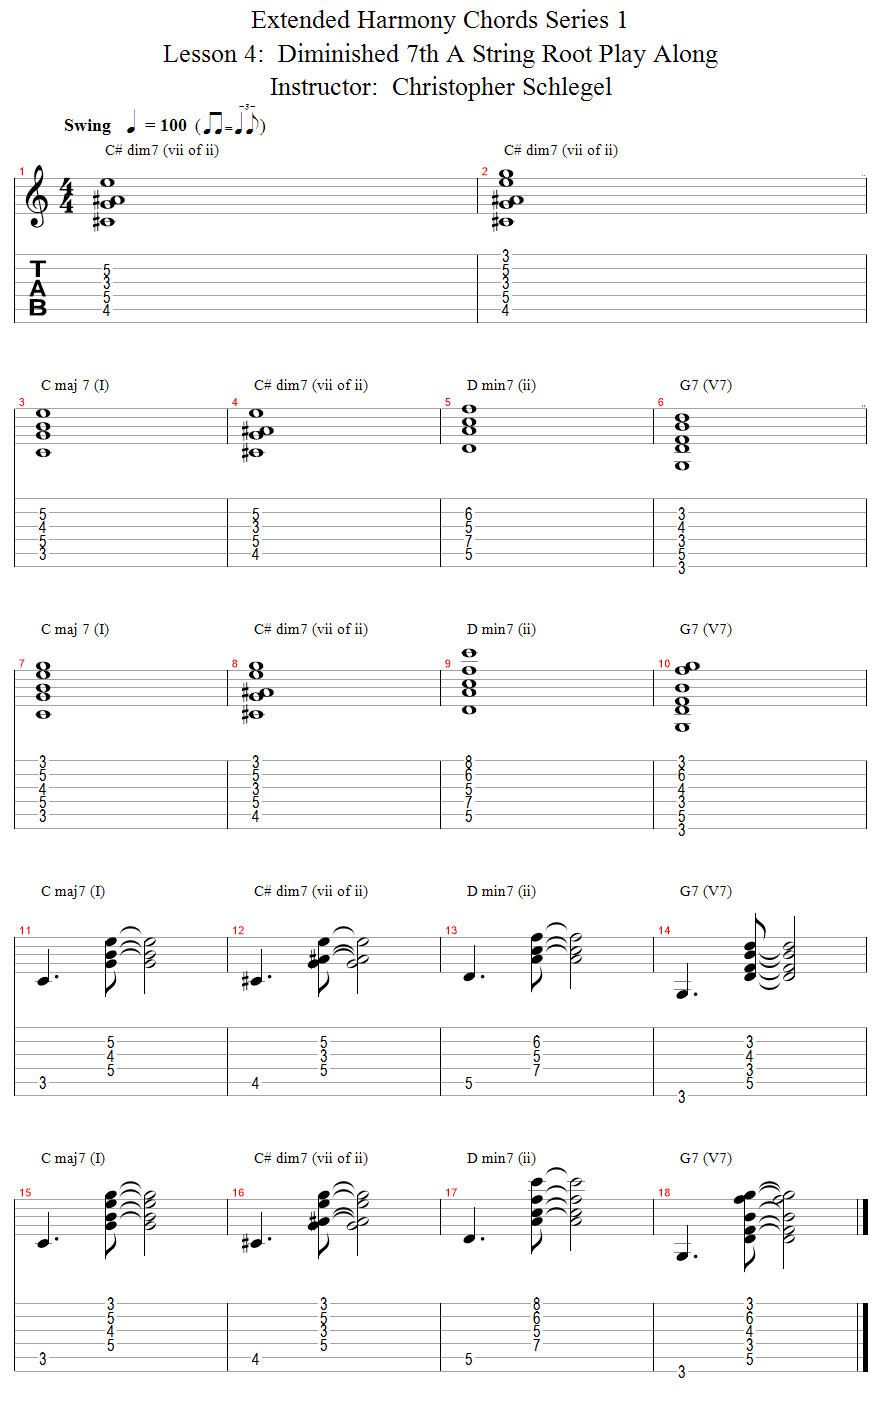 Diminished 7th A String Root song notation